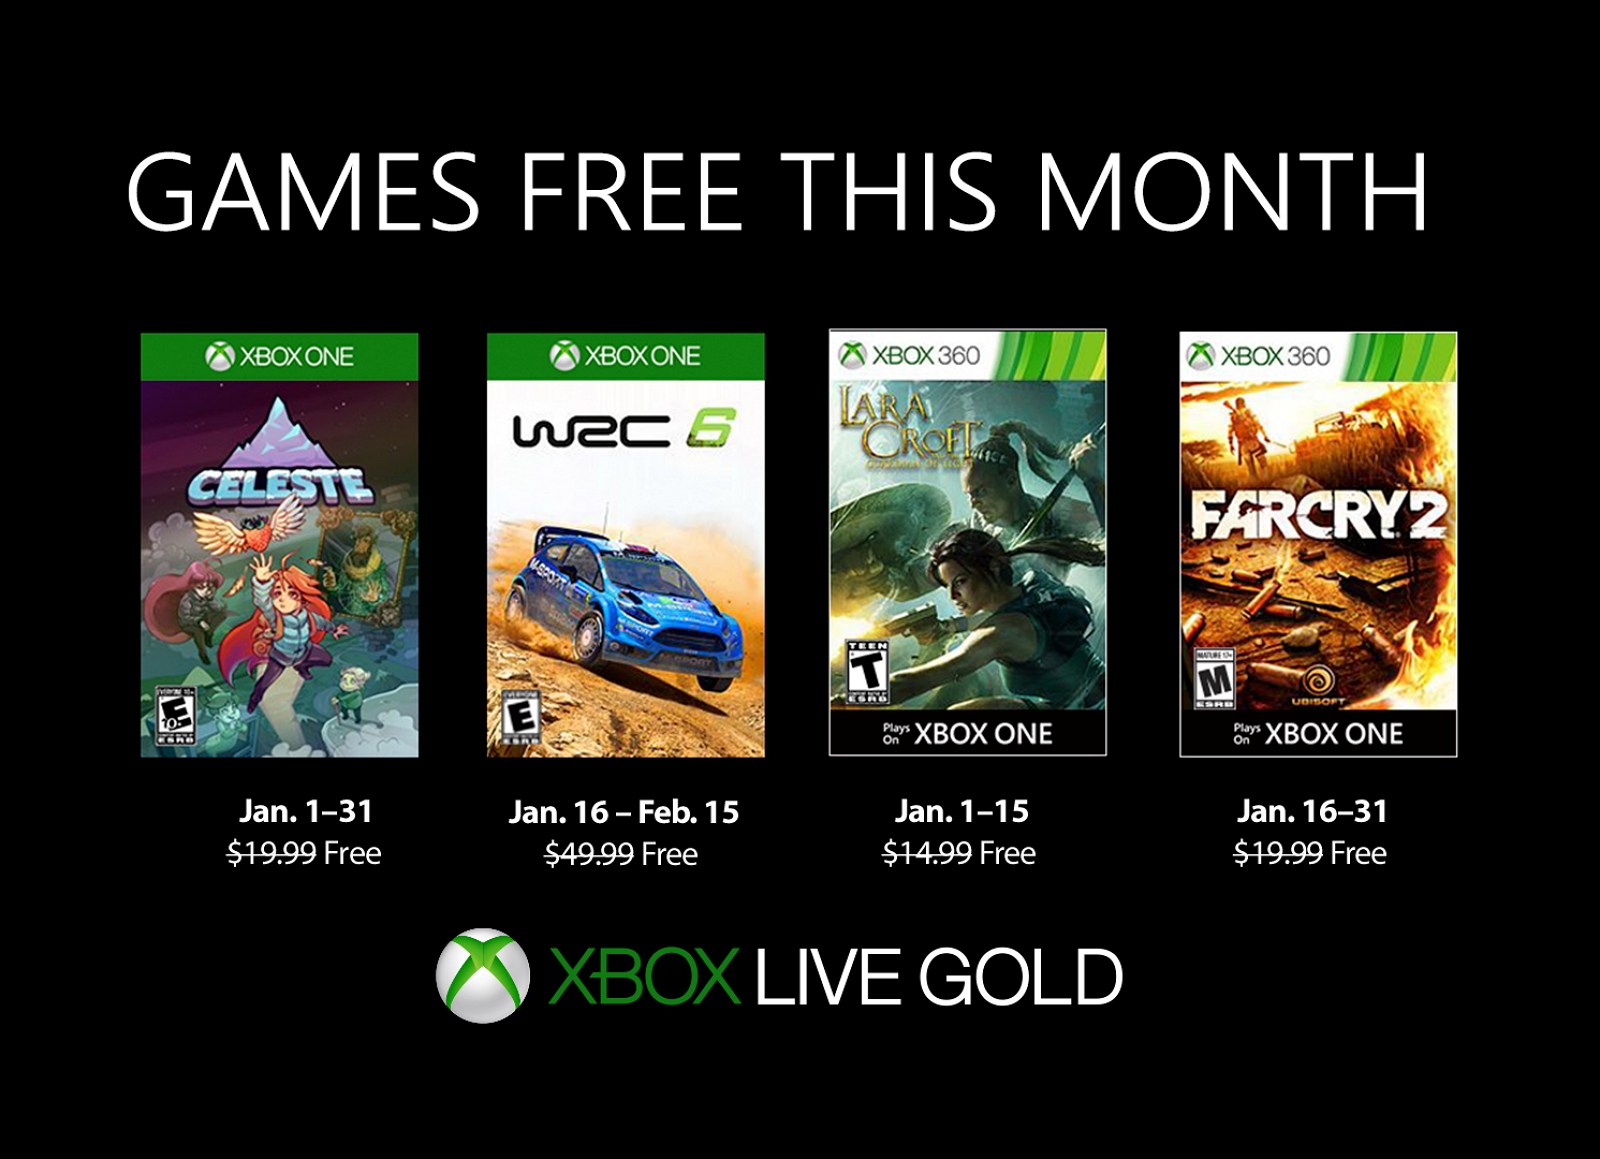 xbox games with gold december 2019